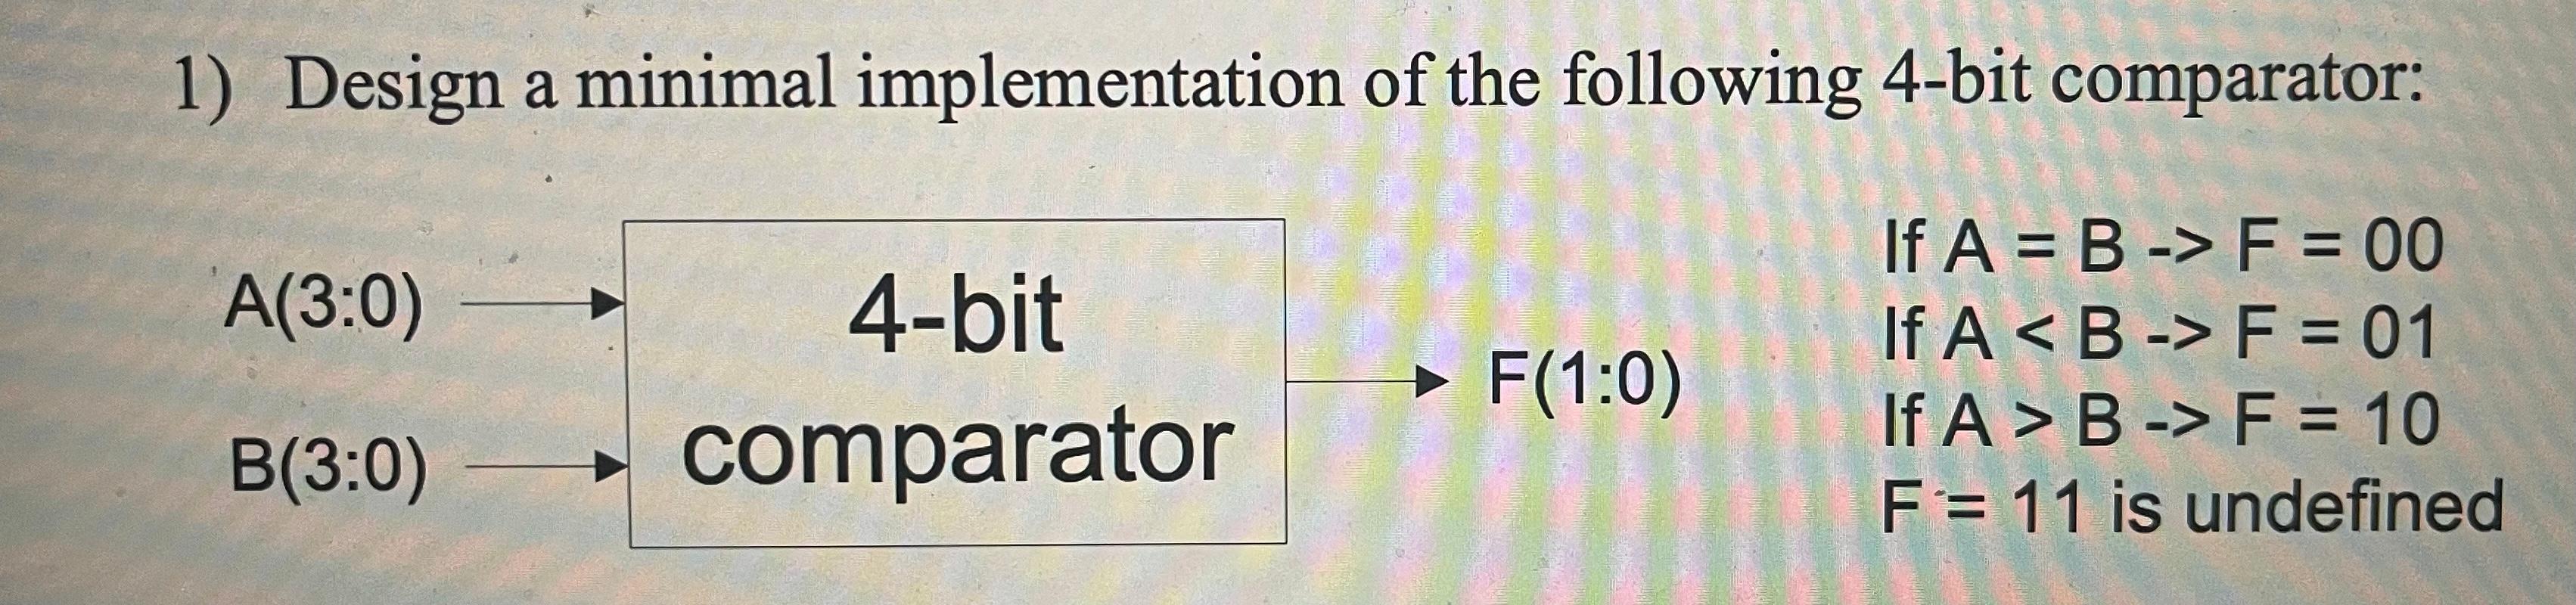 1) Design a minimal implementation of the following 4-bit comparator: If A = B -> F = 00 If A F = 01 If A > B